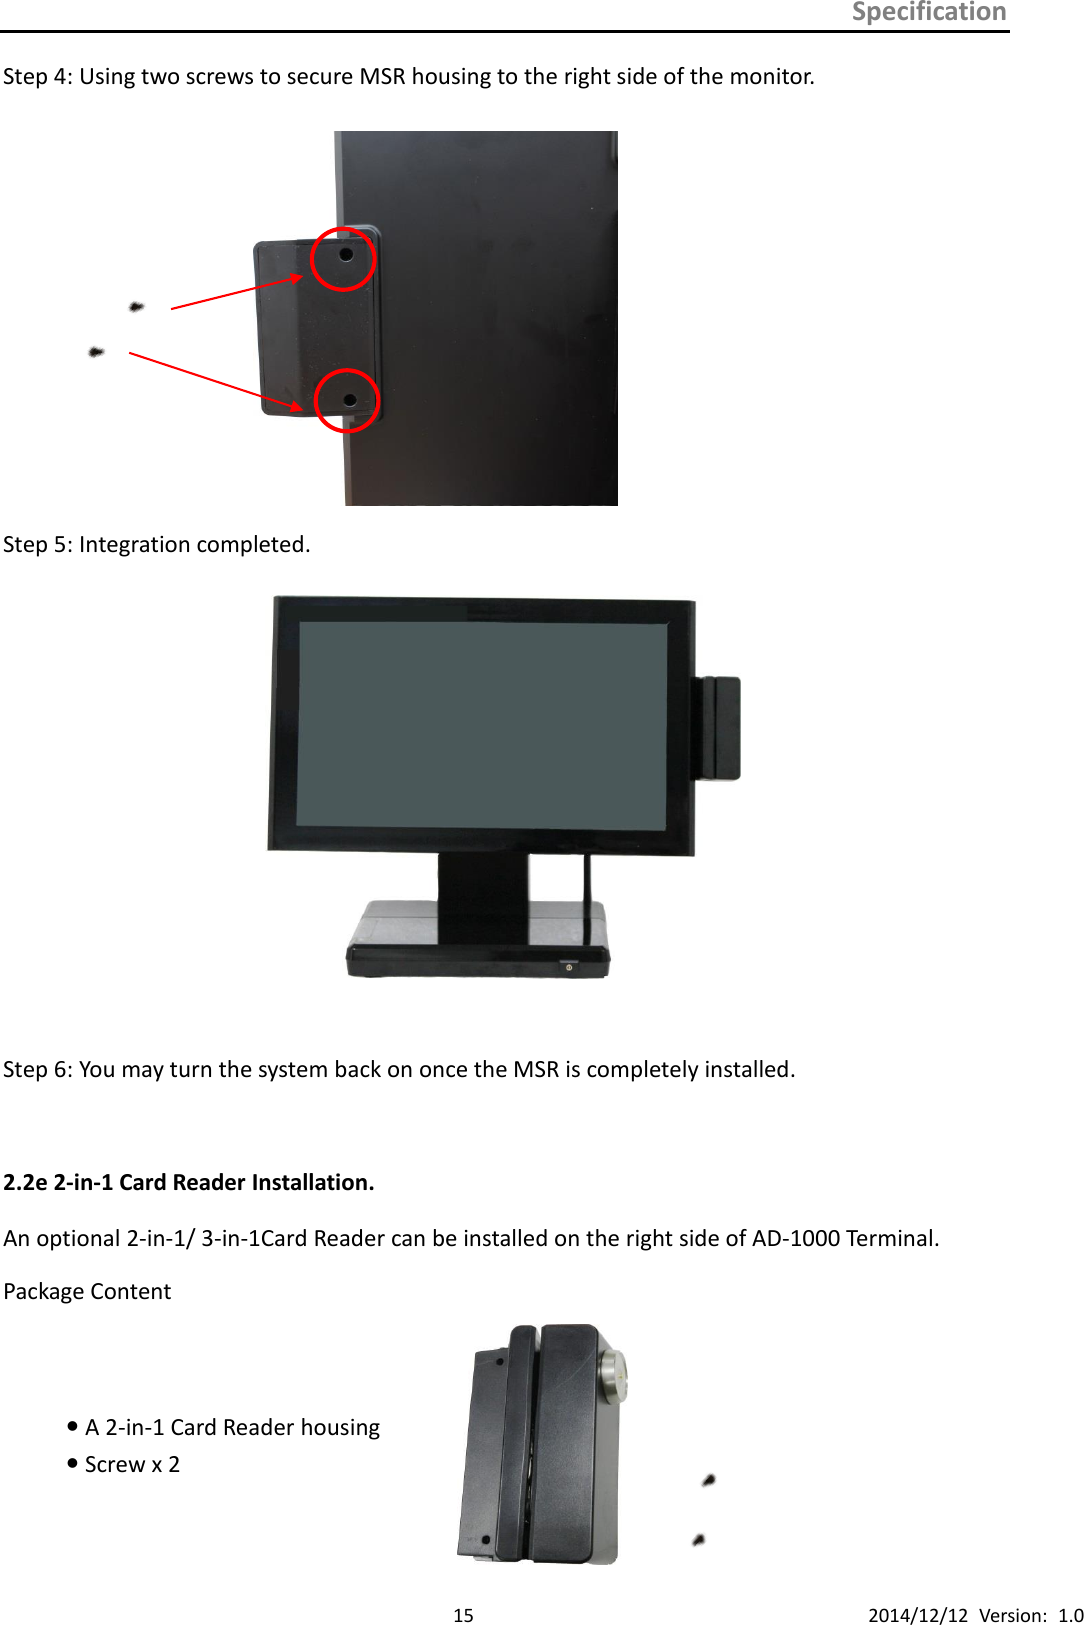 Specification      15 2014/12/12  Version:  1.0 Step 4: Using two screws to secure MSR housing to the right side of the monitor.   Step 5: Integration completed.   Step 6: You may turn the system back on once the MSR is completely installed.  2.2e 2-in-1 Card Reader Installation. An optional 2-in-1/ 3-in-1Card Reader can be installed on the right side of AD-1000 Terminal. Package Content  A 2-in-1 Card Reader housing       Screw x 2     